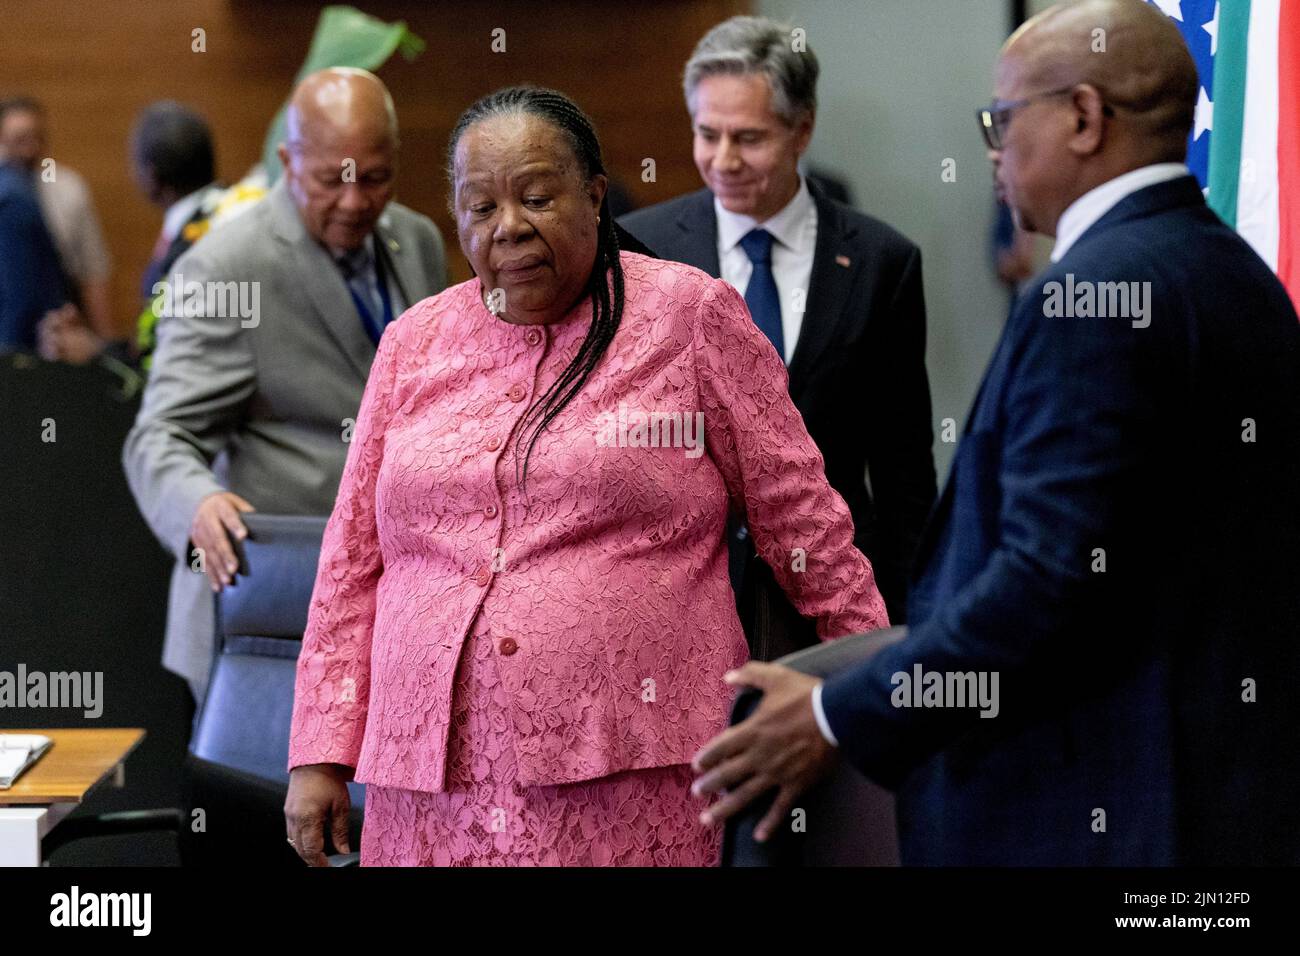 U.S. Secretary of State Antony Blinken and South Africa's Foreign Minister Naledi Pandor arrive for a news conference after a meeting at the South African Department of International Relations and Cooperation, in Pretoria, South Africa, August 8, 2022. Andrew Harnik/Pool via REUTERS Stock Photo